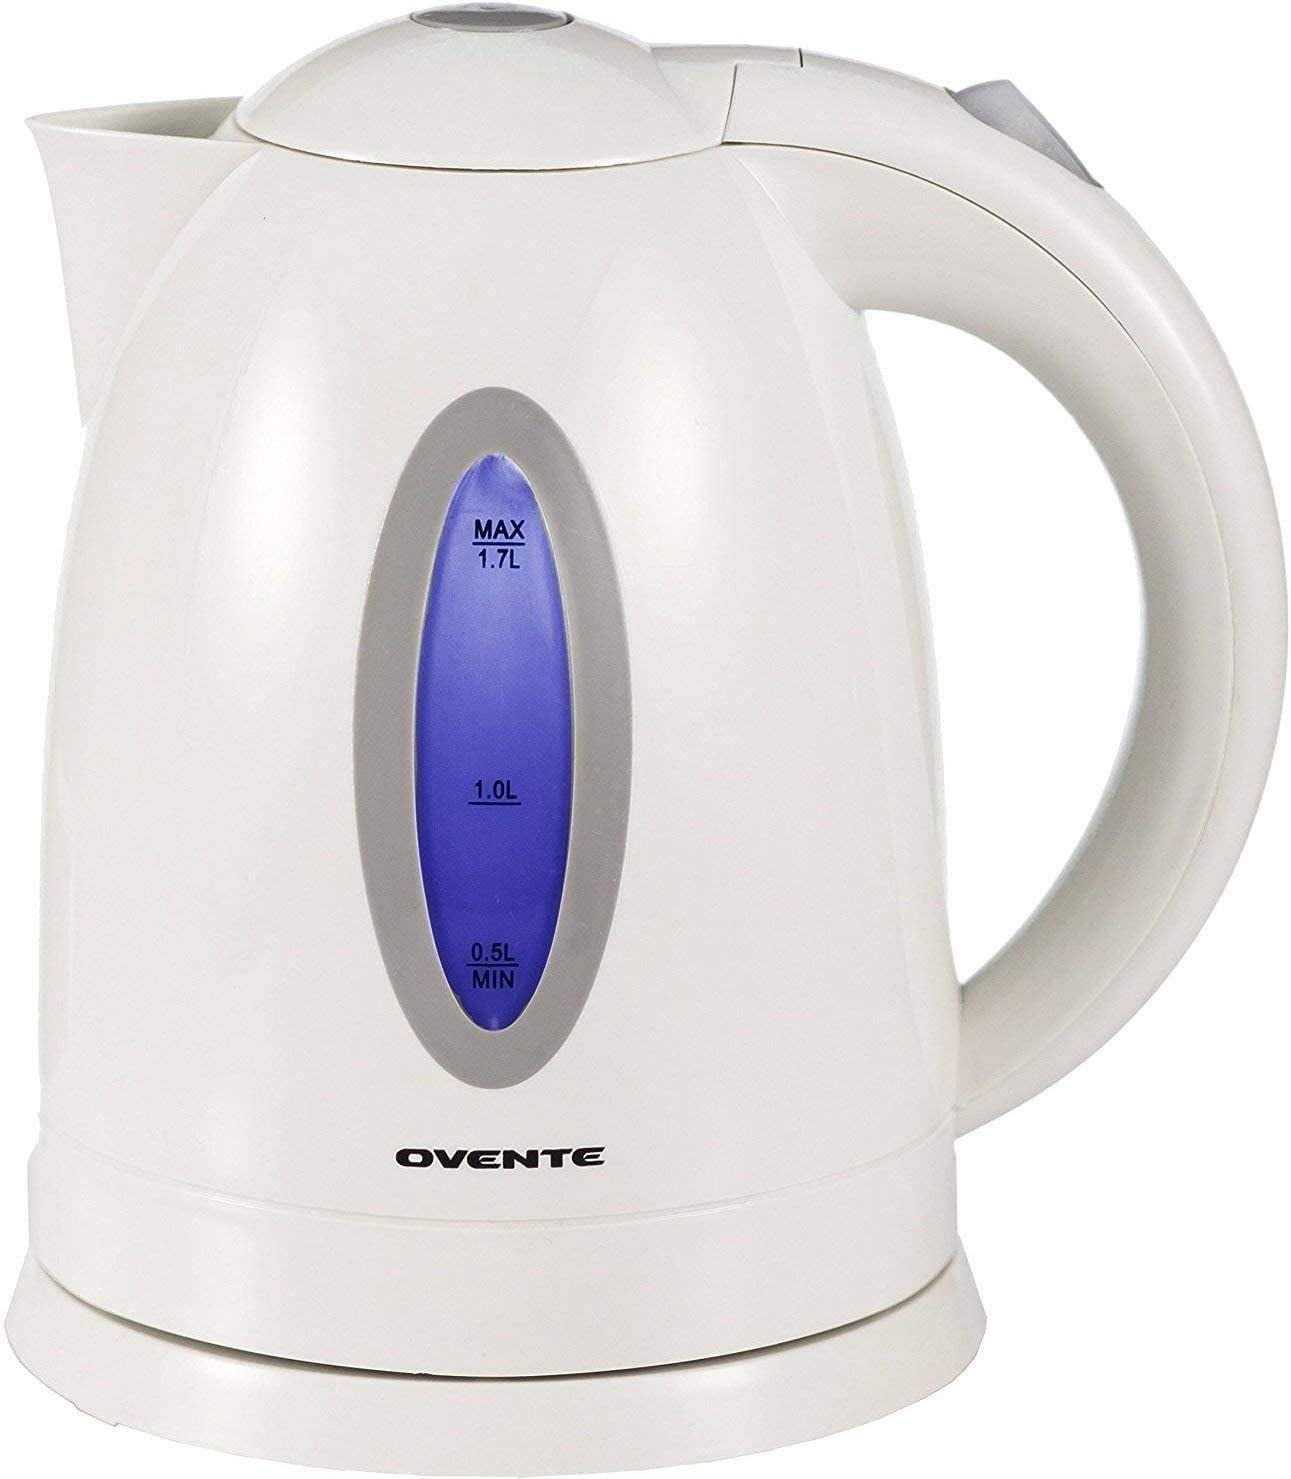 Auto Shutoff Function and Boil Dry Protection Ovente Electric Water Kettle 1.7 Liter with LED Indicator Light KP72G BPA-Free 1100 Watts Fast & Concealed Heating Element Green